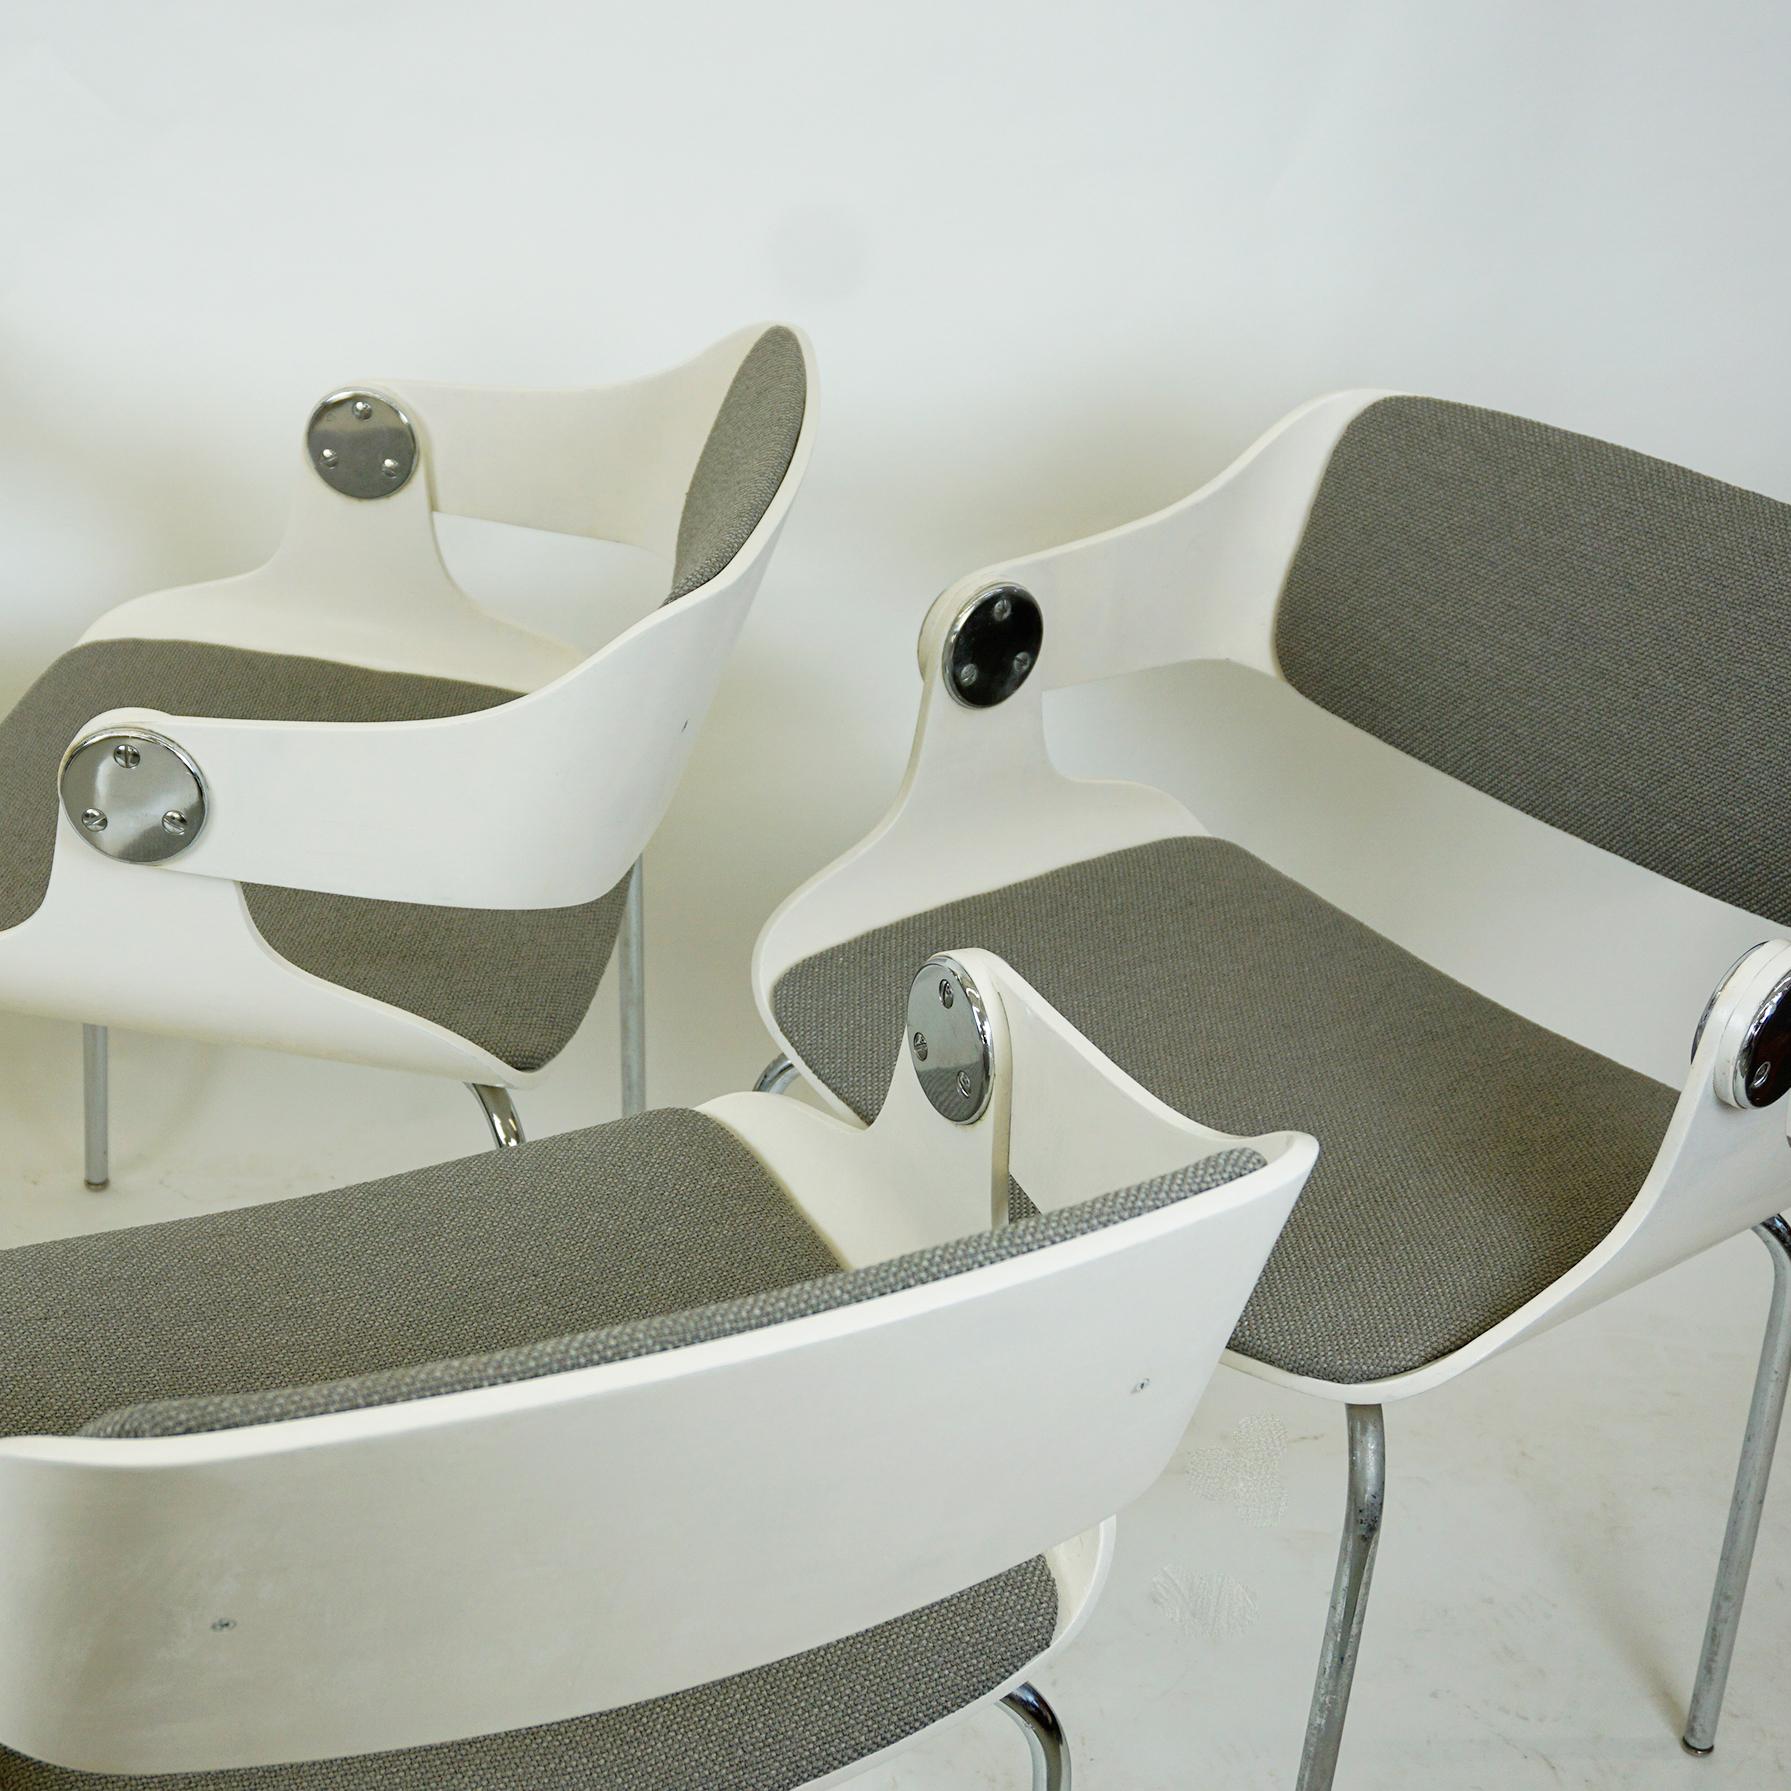 This iconic side chairs from Germany 1960s were designed by Eugen Schmidt for Soloform. They feature chromed steel legs and white lacquered bent plywood seats with newly upholstered grey seats and backs. The chairs are very comfortable and will be